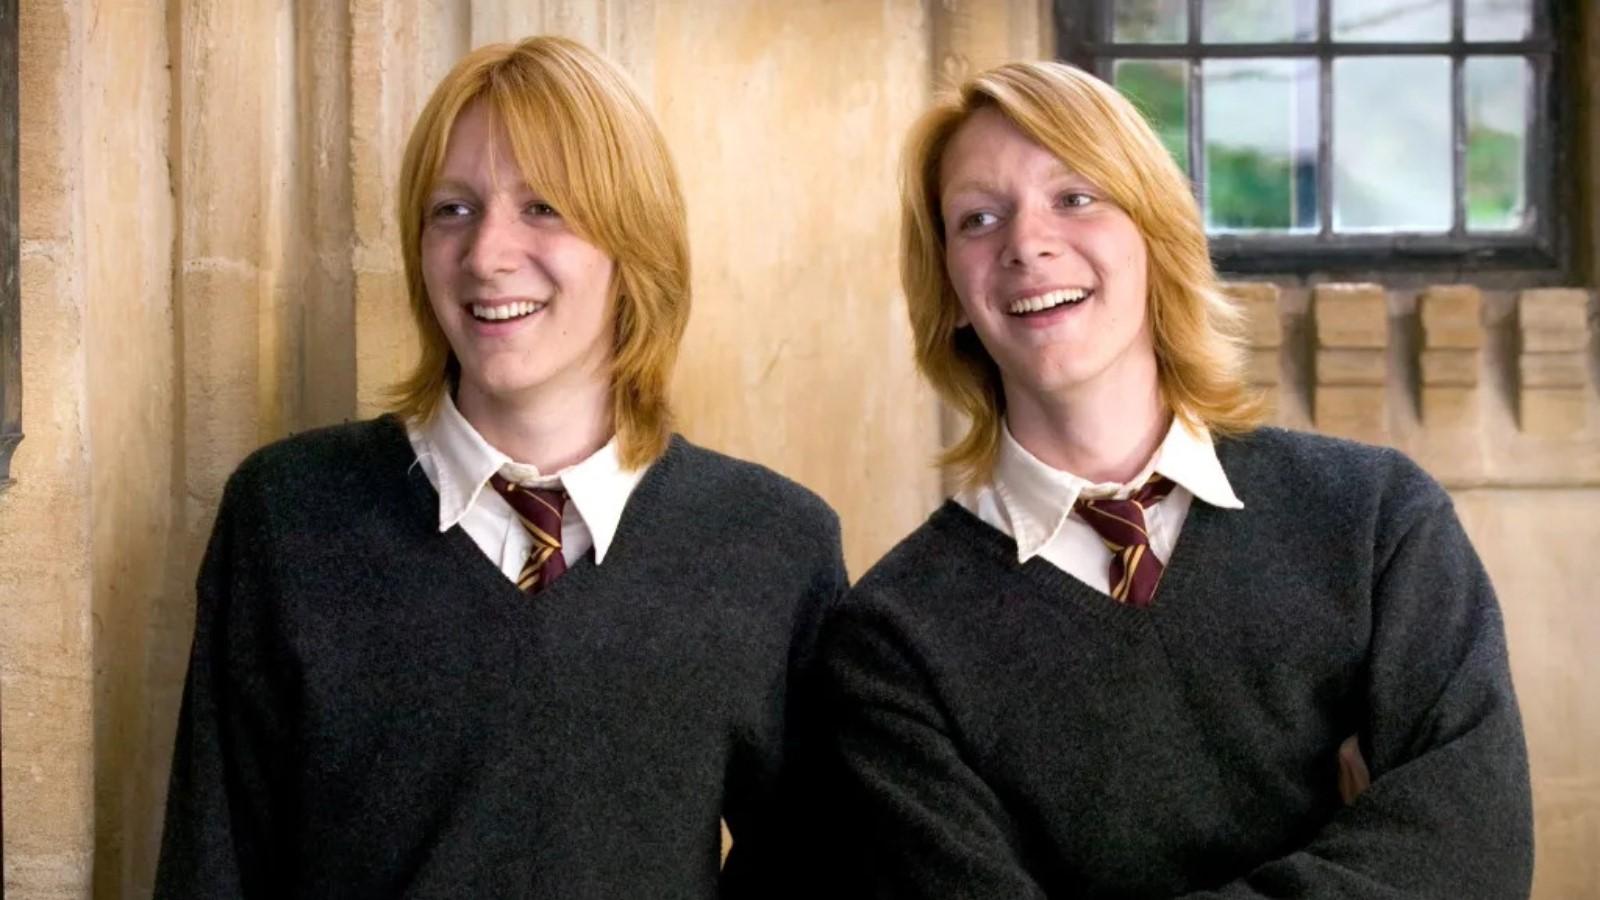 Oliver Phelps and James Phelps as Fred and George Weasley in Harry Potter